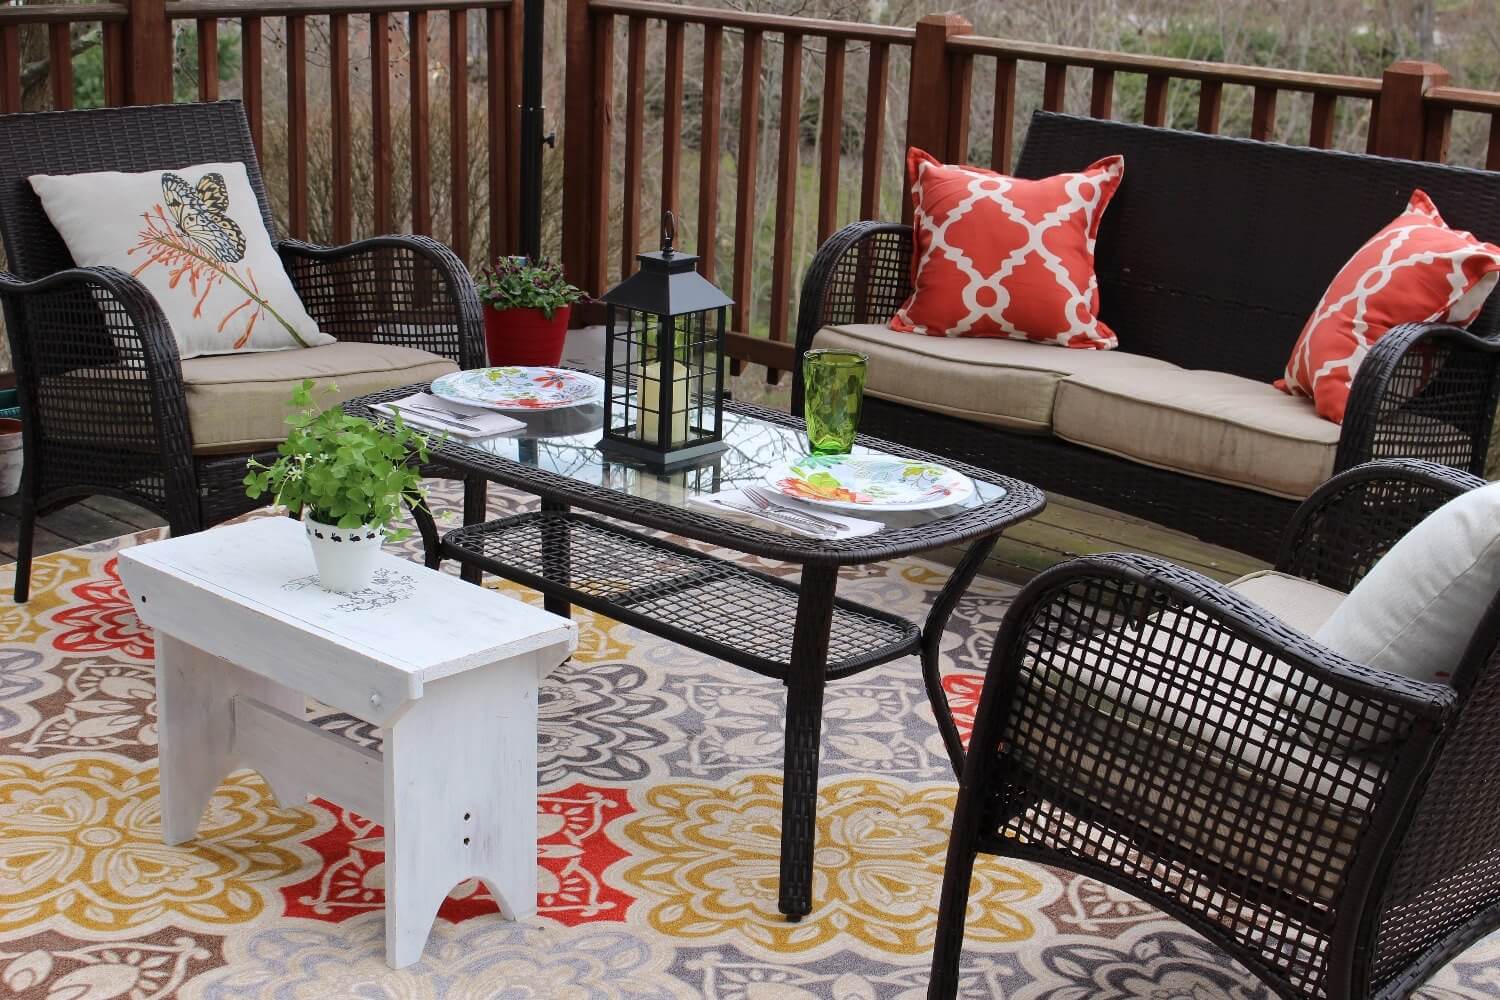 Decks are a great place to relax outside with family and friends